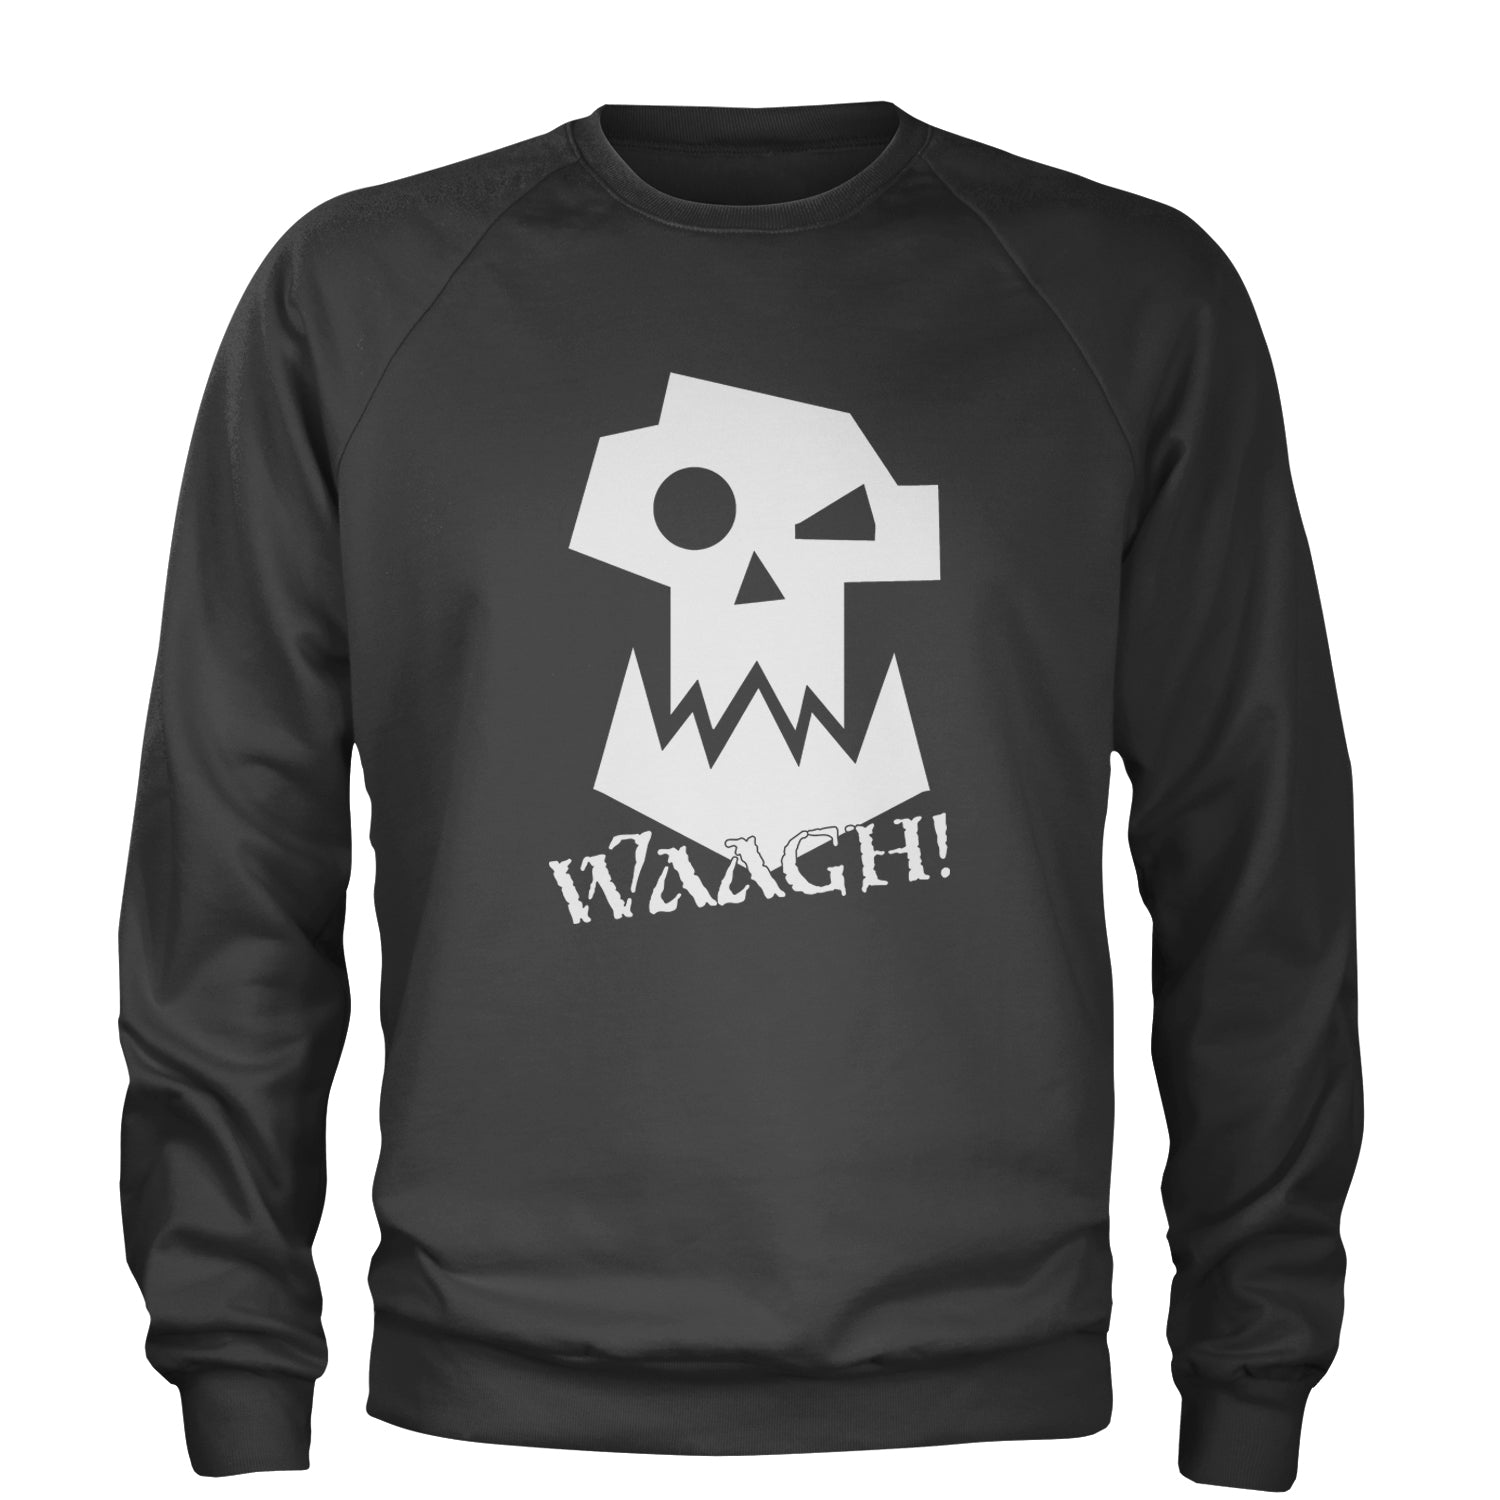 Ork Miniature Tabletop Wargaming Waagh Adult Crewneck Sweatshirt #expressiontees by Expression Tees